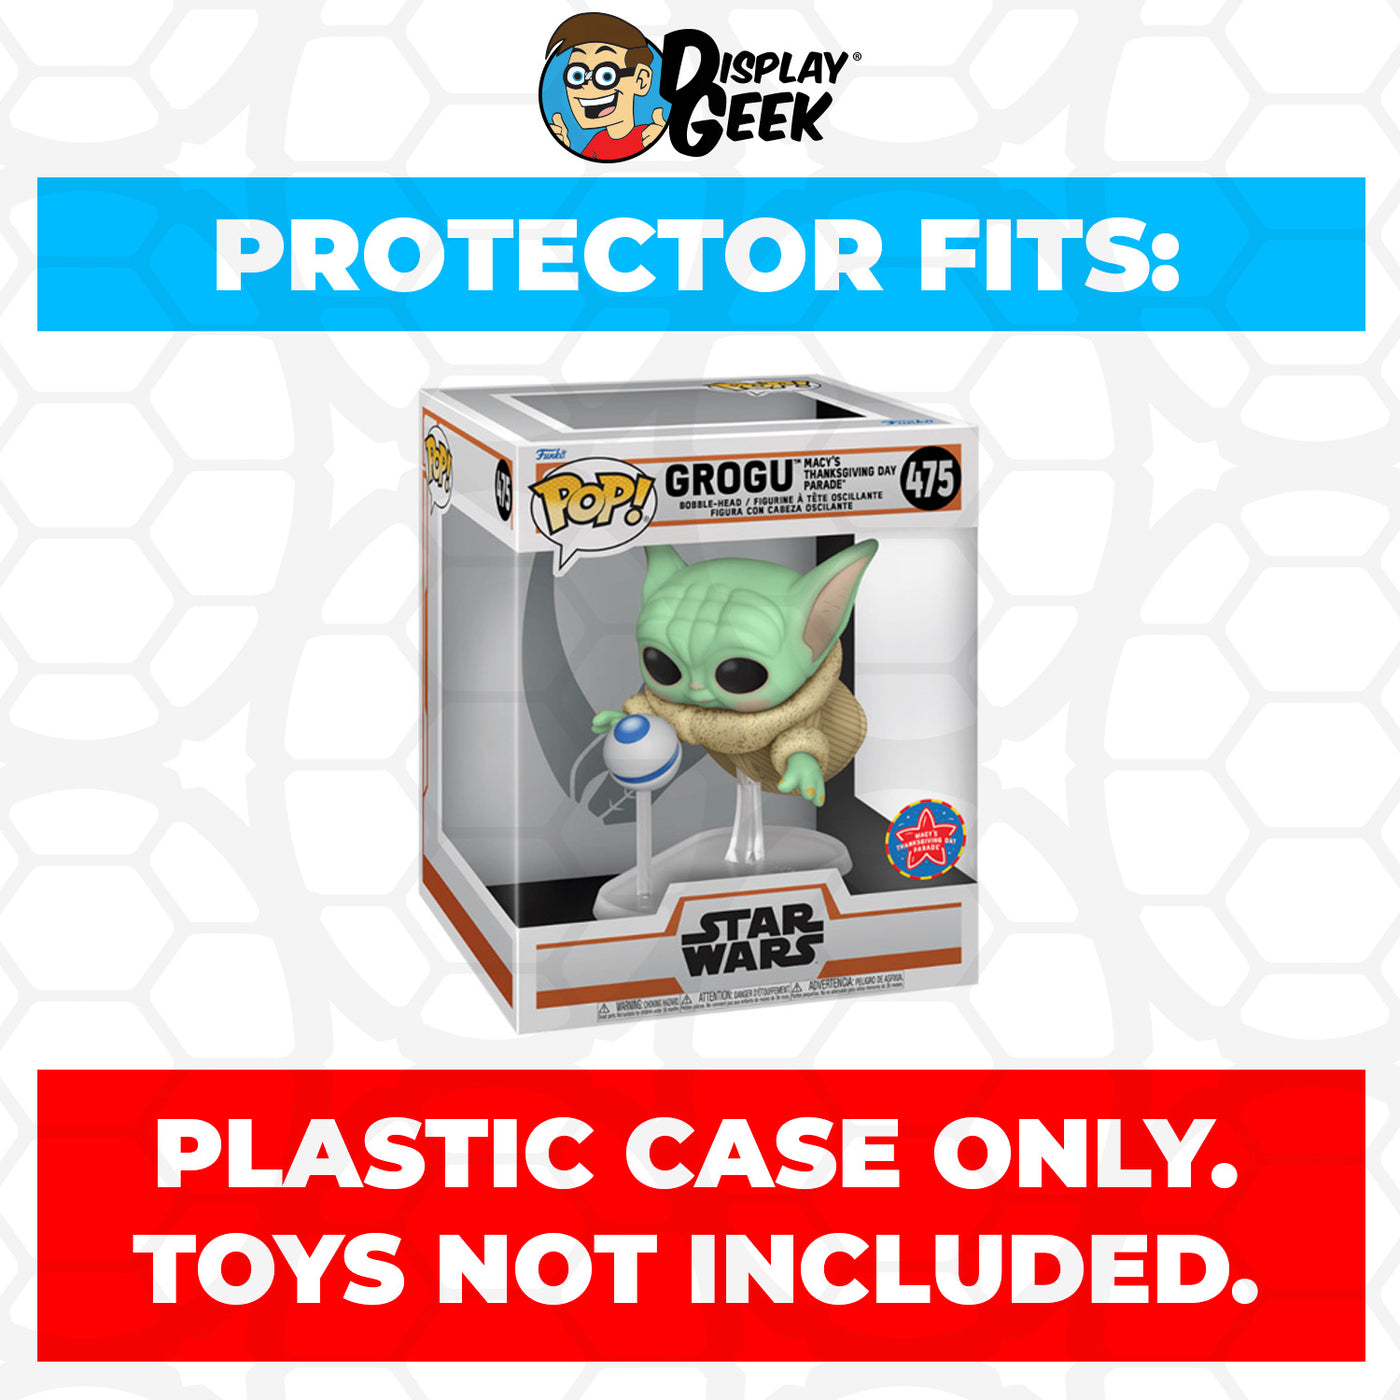 Pop Protector for Grogu Macy's Thanksgiving Day Parade #475 Funko Pop Deluxe on The Protector Guide App by Display Geek